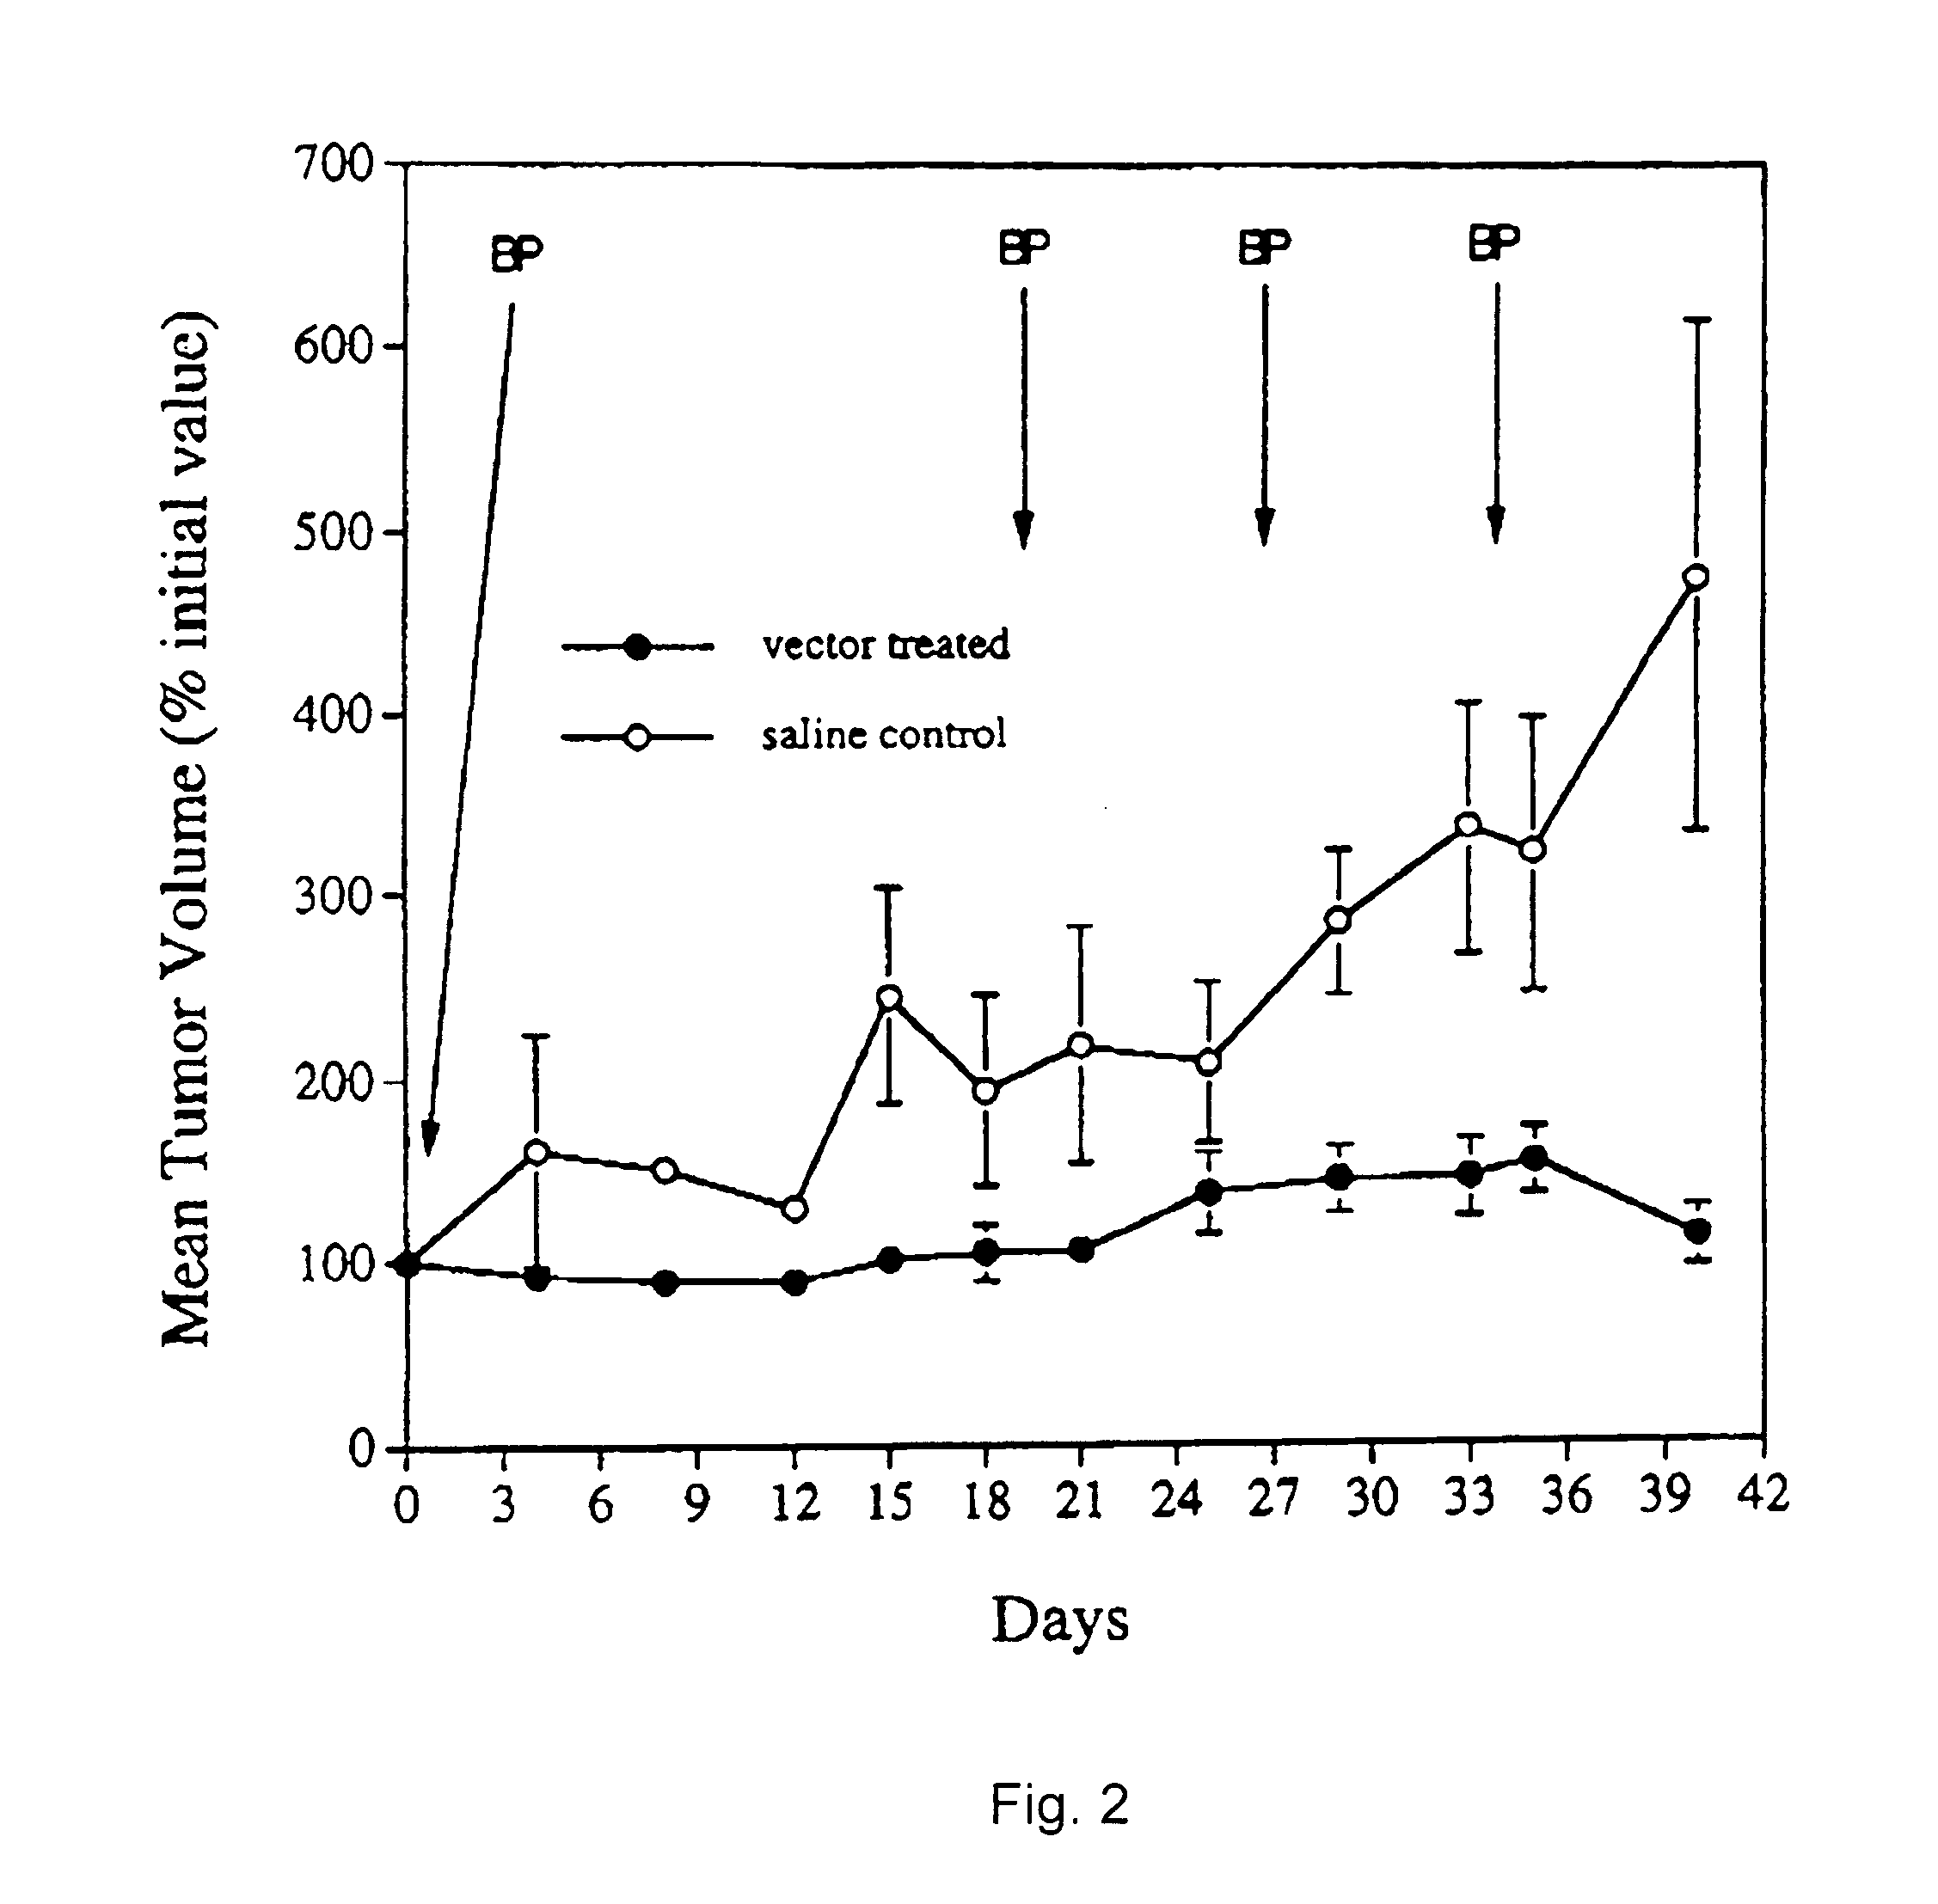 Agents and methods for treatment of disease by oligosaccharide targeting agents